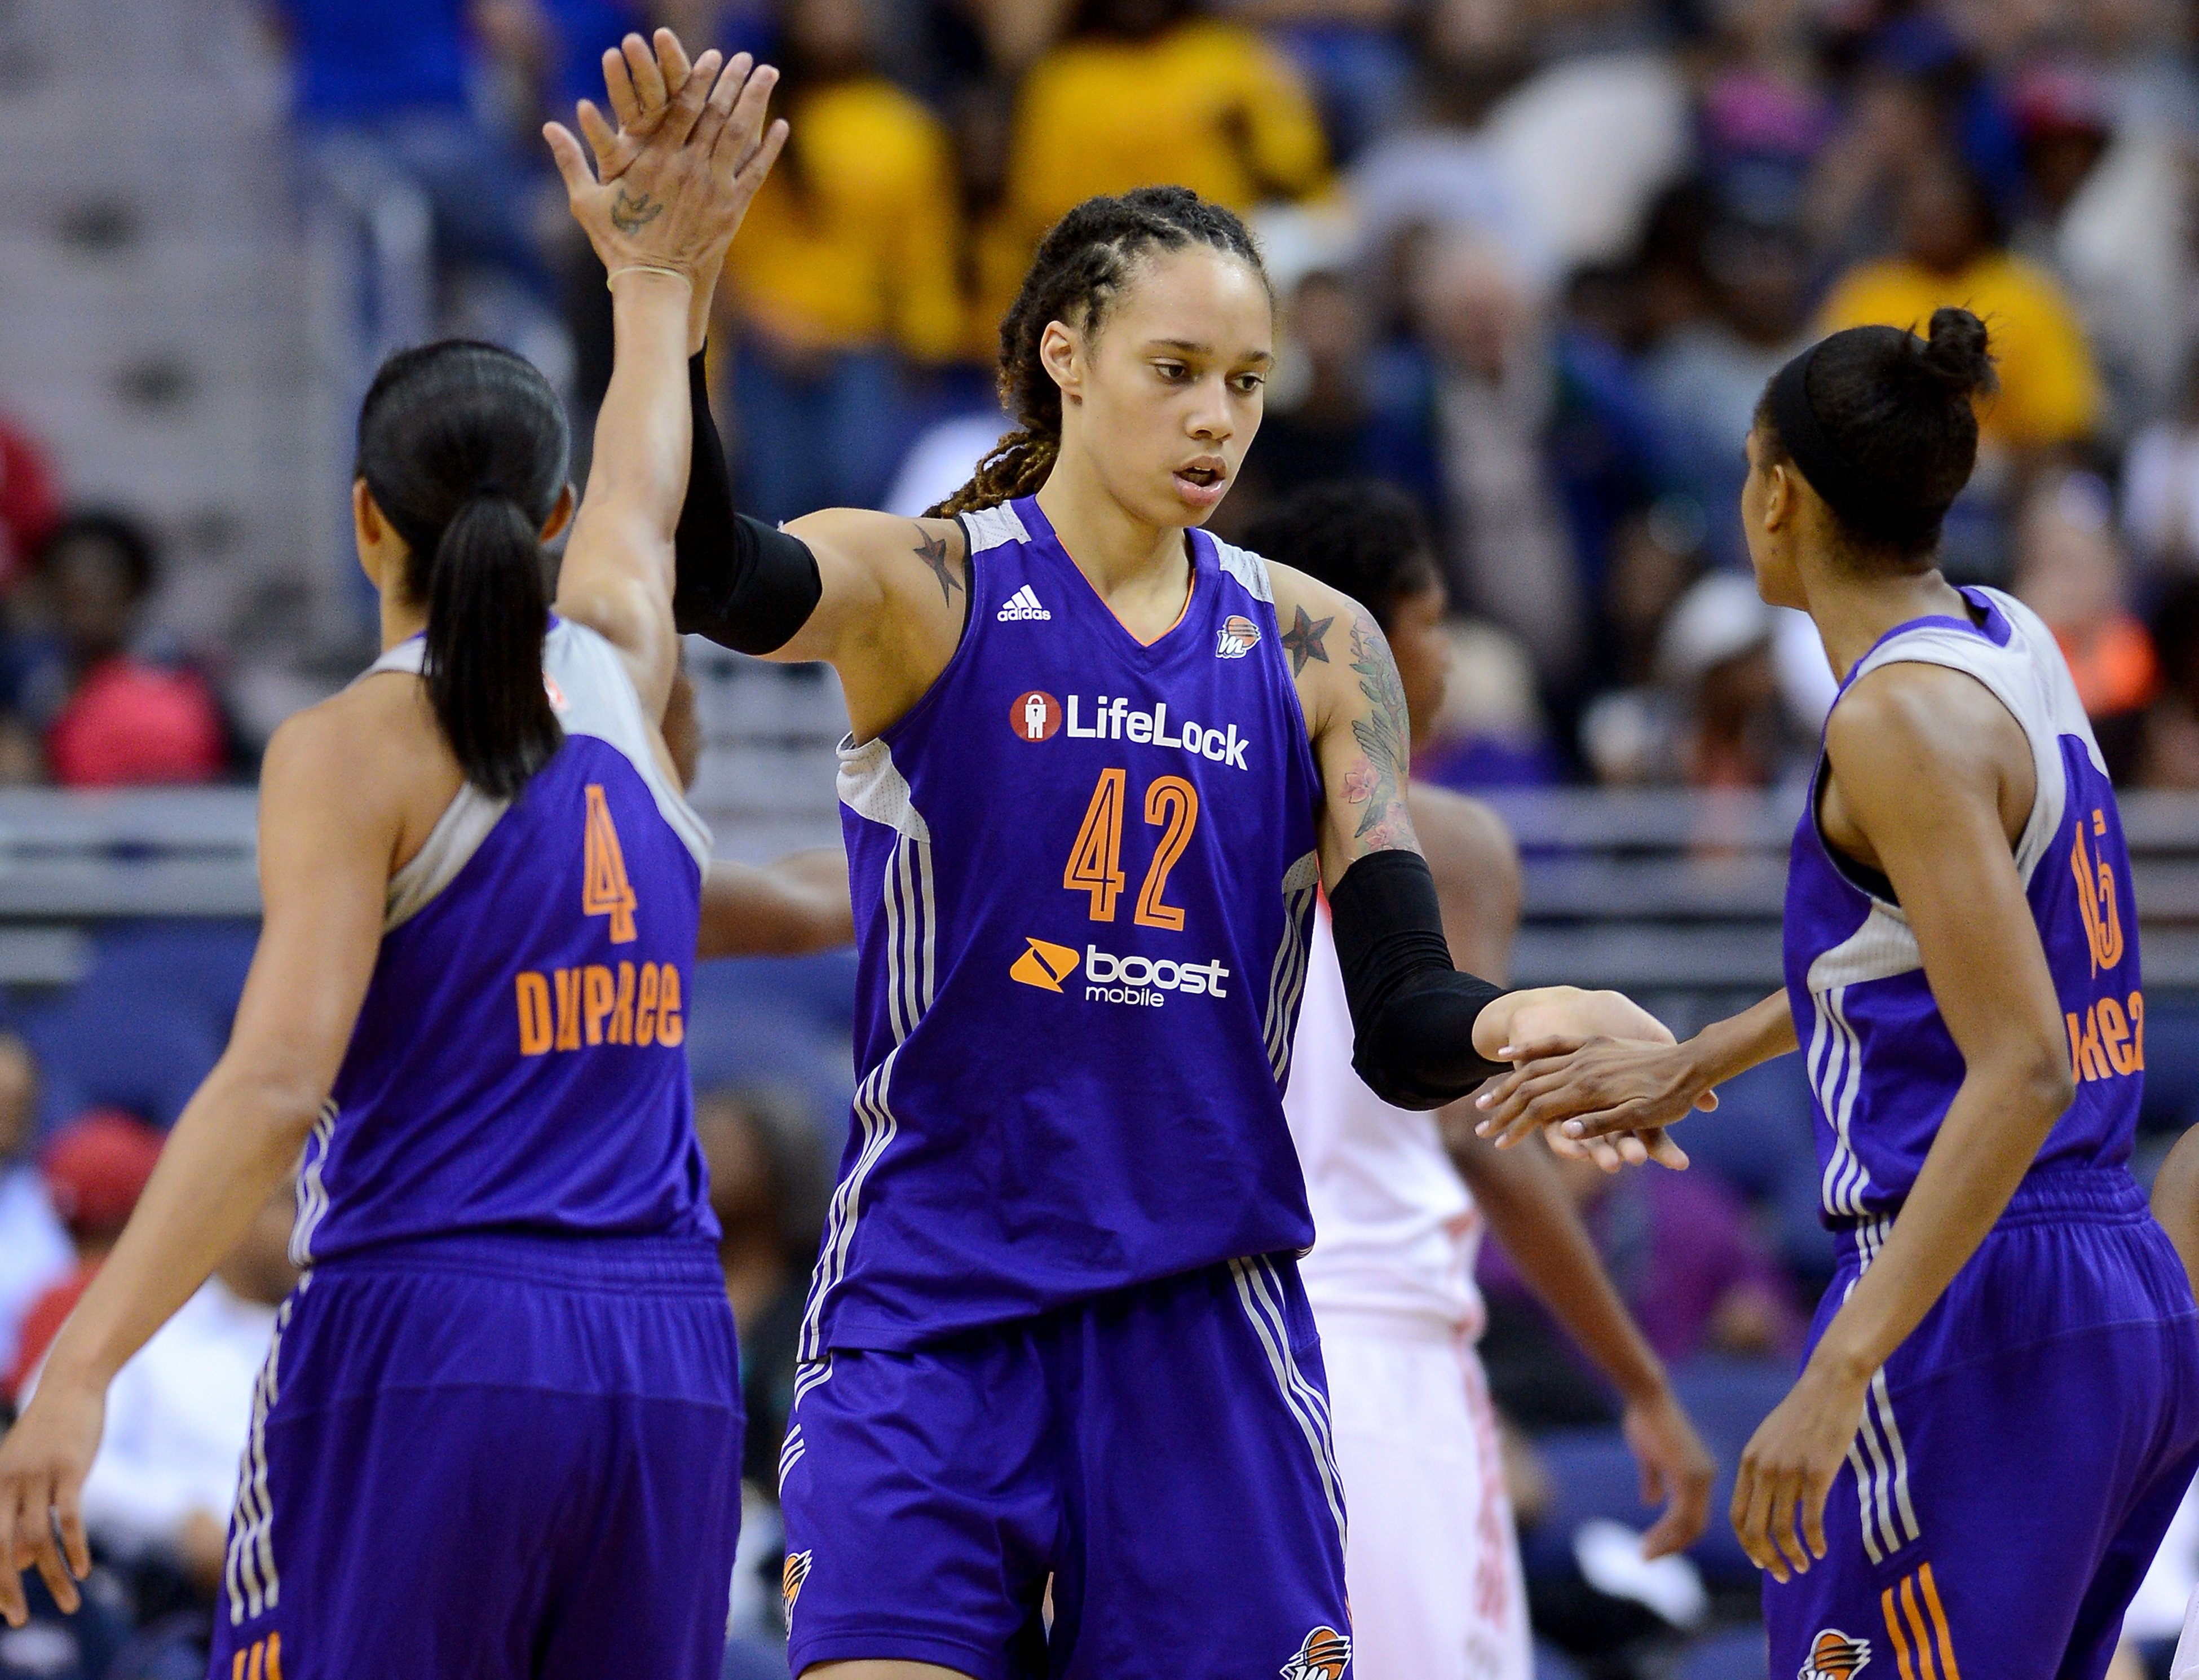 Phoenix Mercury Brittney Griner center (42) celebrates with teammates Candice Dupree (4) and Briana Gilbreath (15), after she scored and drew a foul against the Washington Mystics in the third quarter at the Verizon Center in Washington, D.C., Thursday, June 27, 2013, (Chuck Myers—MCT/Getty Images)